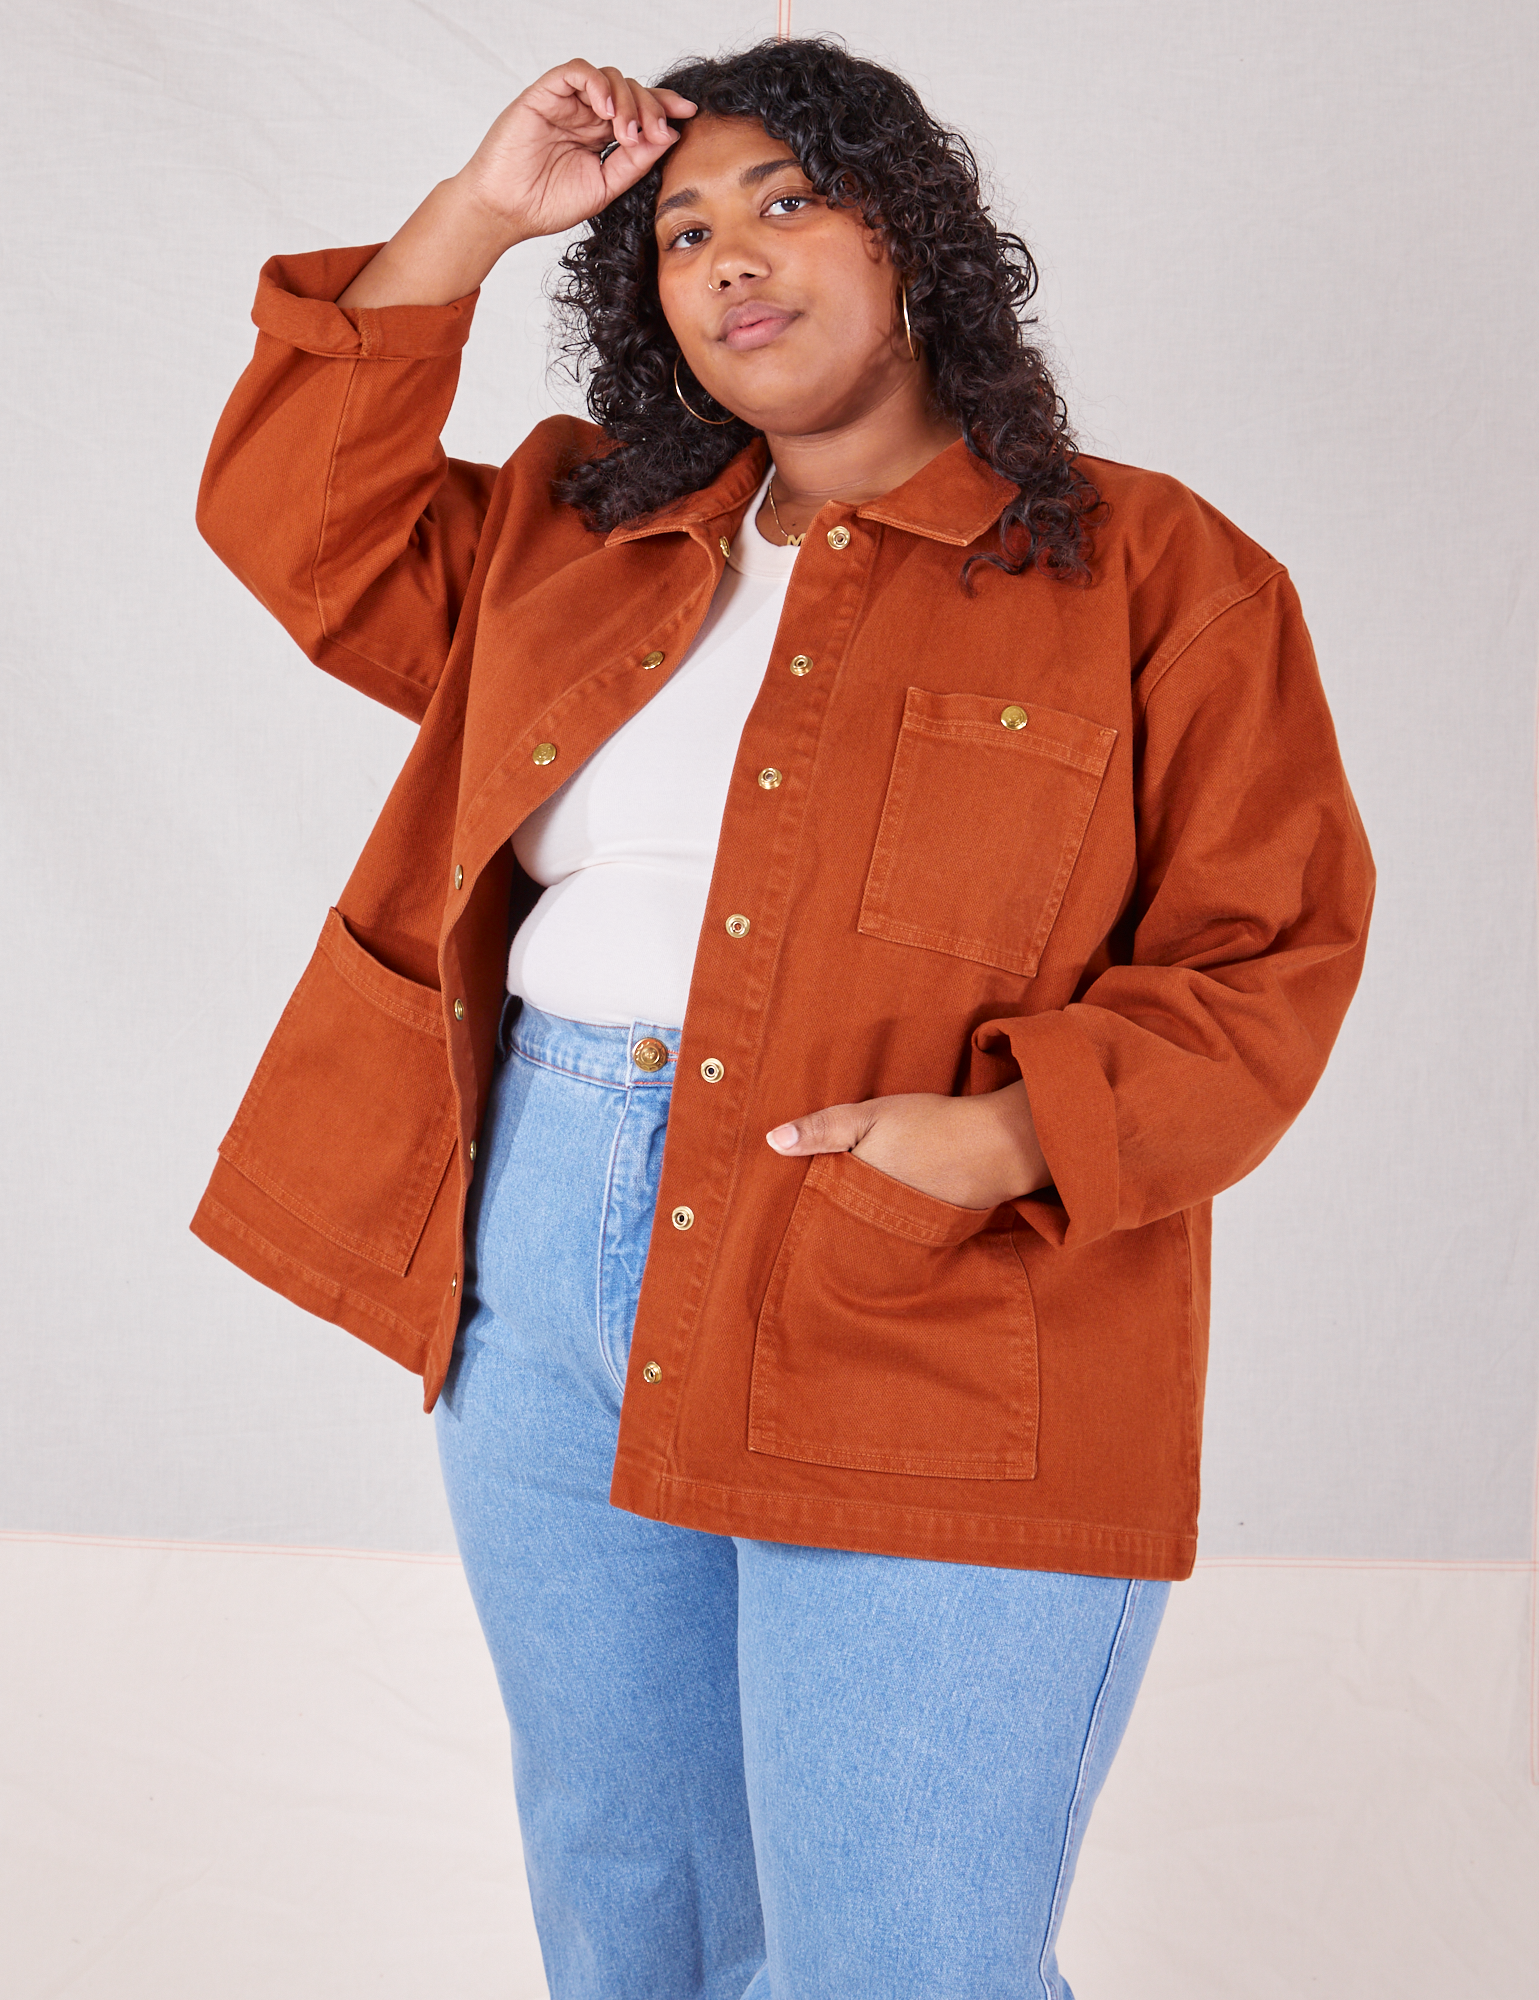 Morgan is wearing Denim Work Jacket in Burnt Terracotta. She has one hand in the front pocket